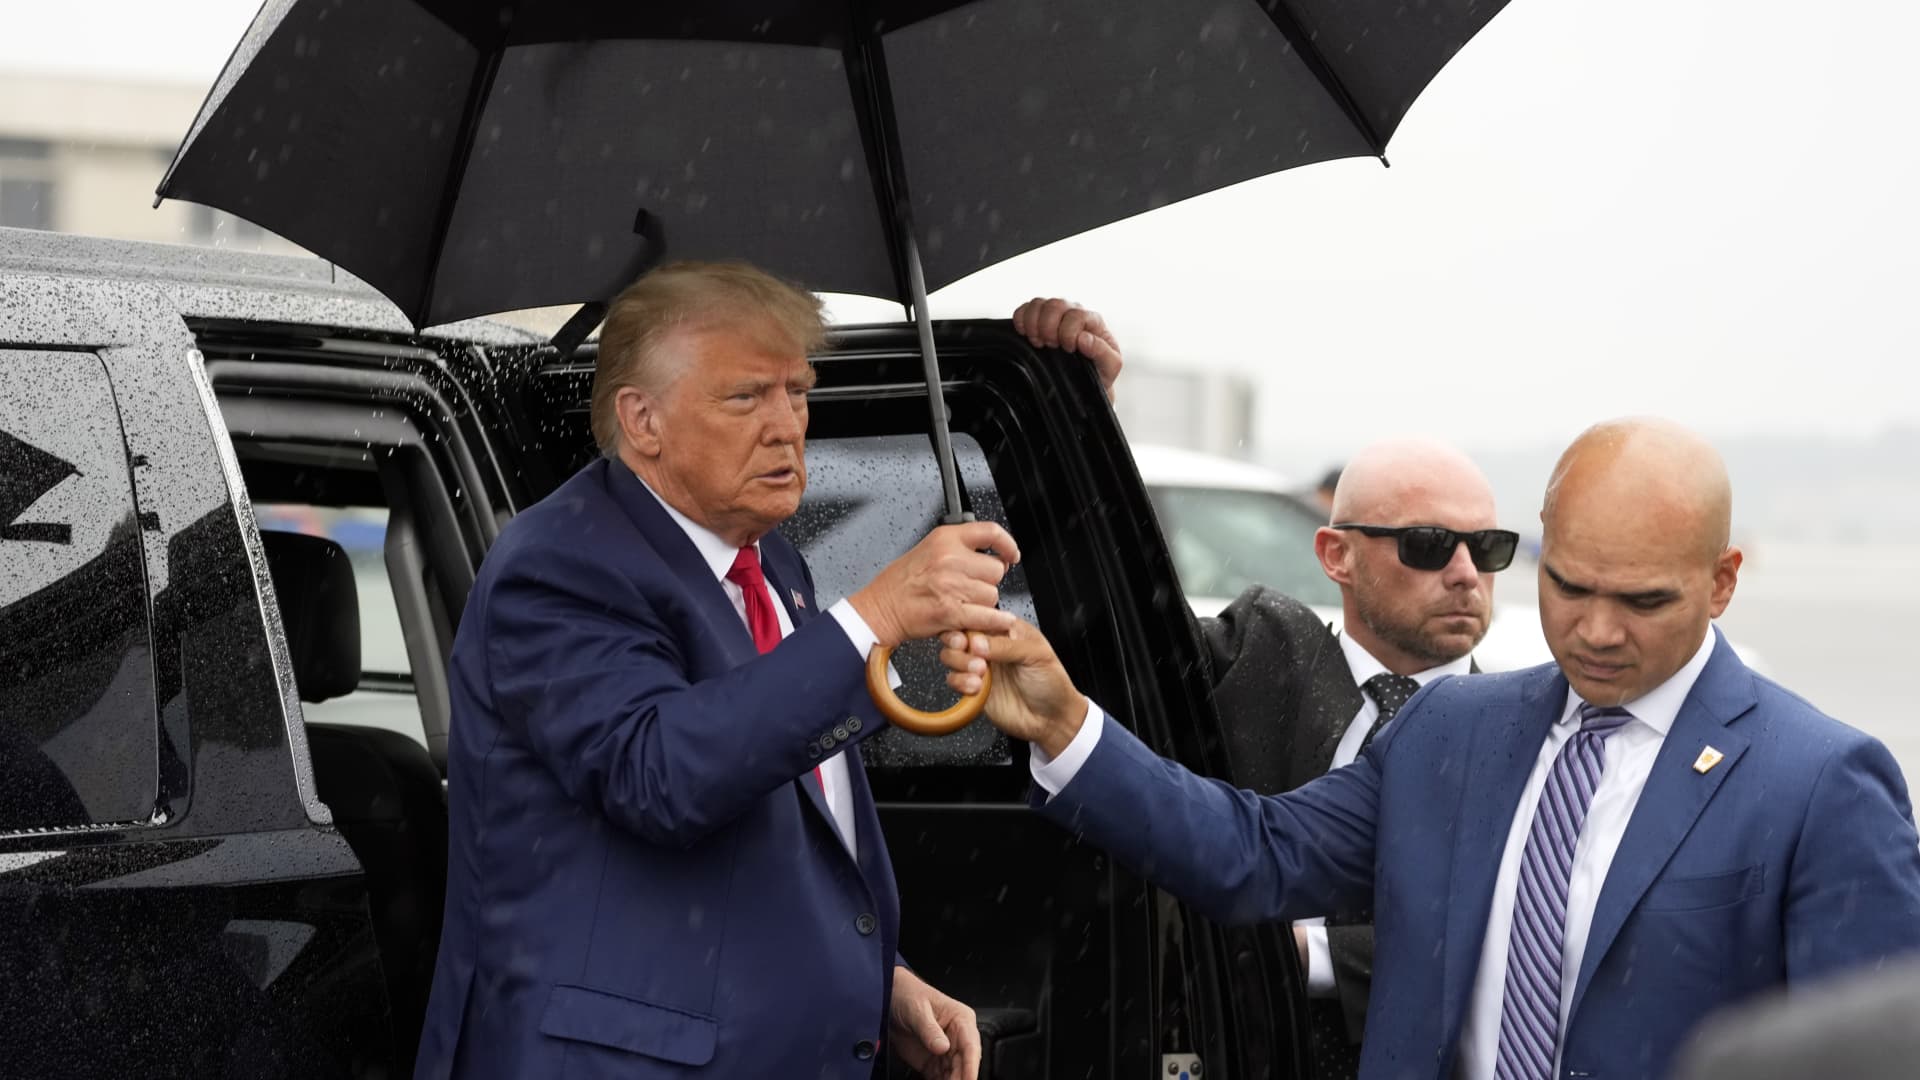 Valet Walt Nauta hands former President Donald Trump an umbrella before he speaks at Ronald Reagan Washington National Airport, Thursday, Aug. 3, 2023, in Arlington, Va., after facing a judge on federal conspiracy charges that allege he conspired to subvert the 2020 election